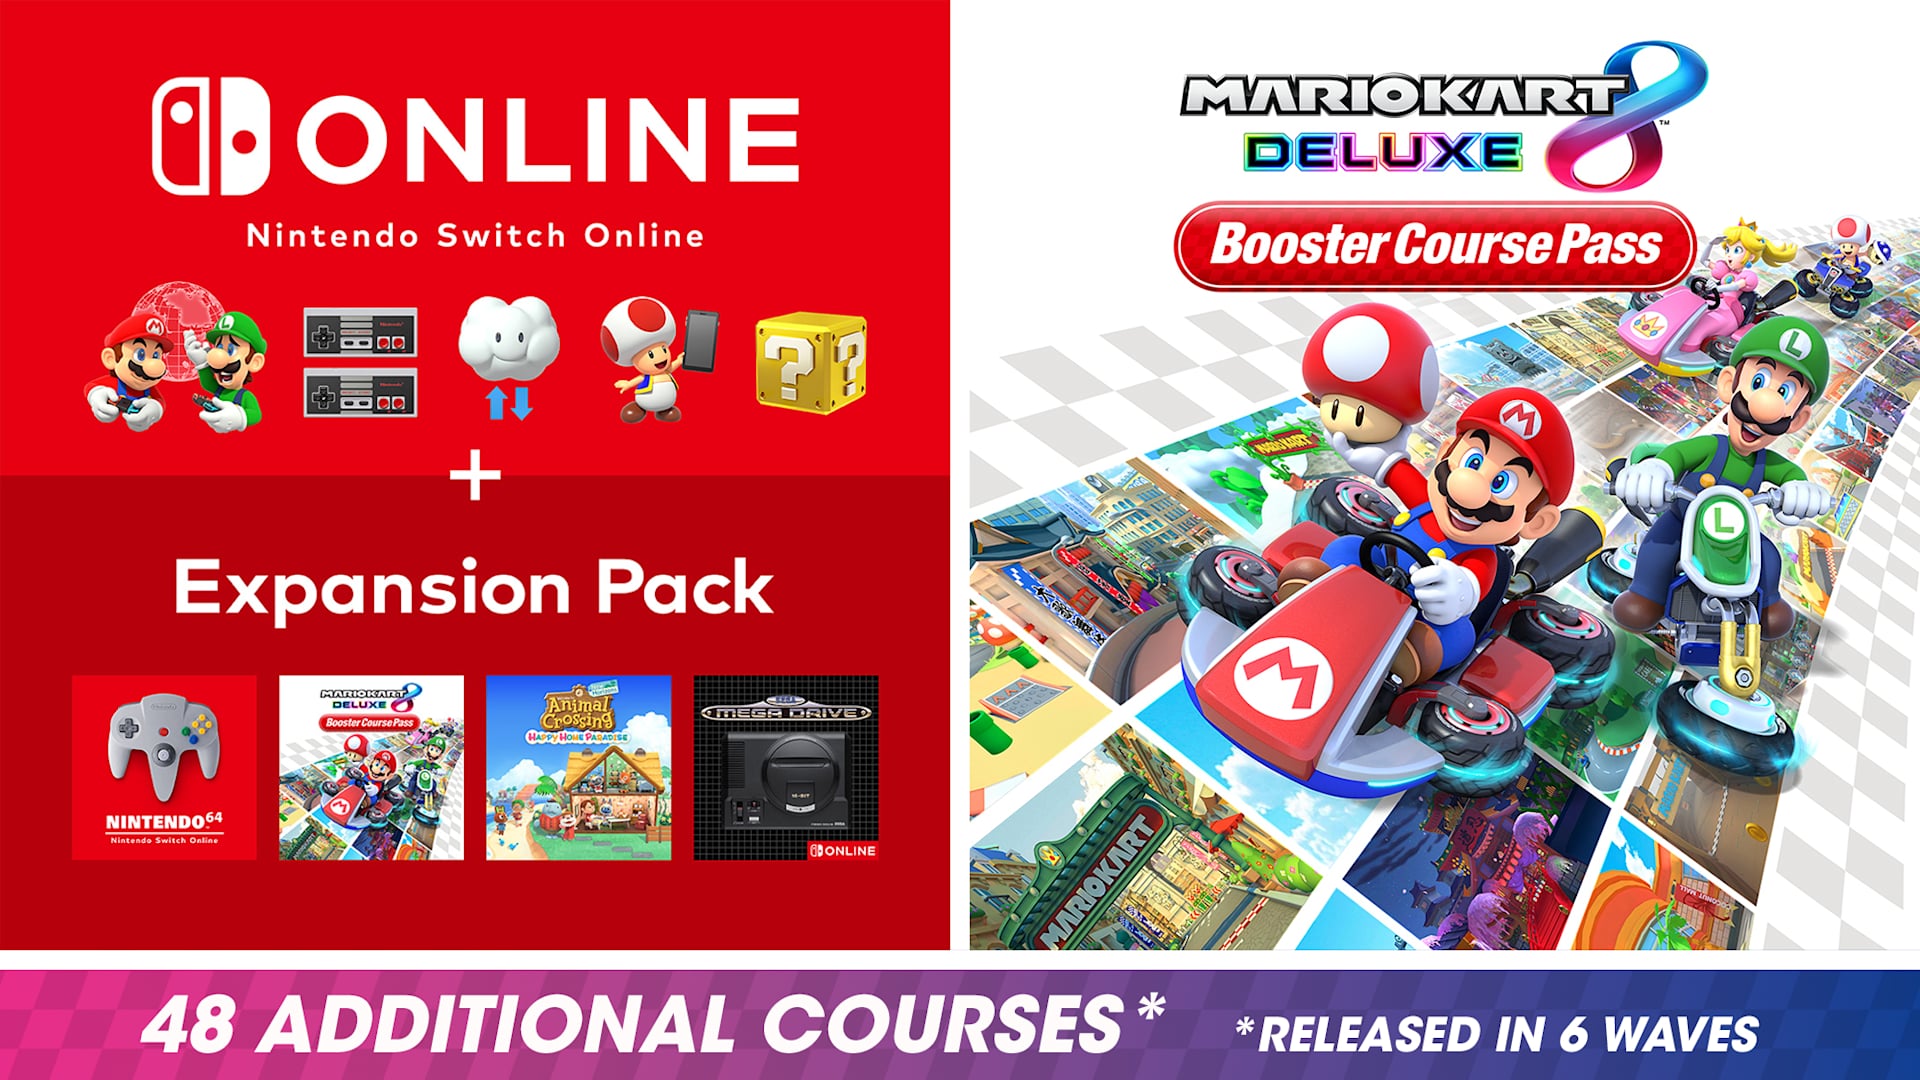 Two ways to access the Mario Kart 8 Deluxe – Booster Course Pass